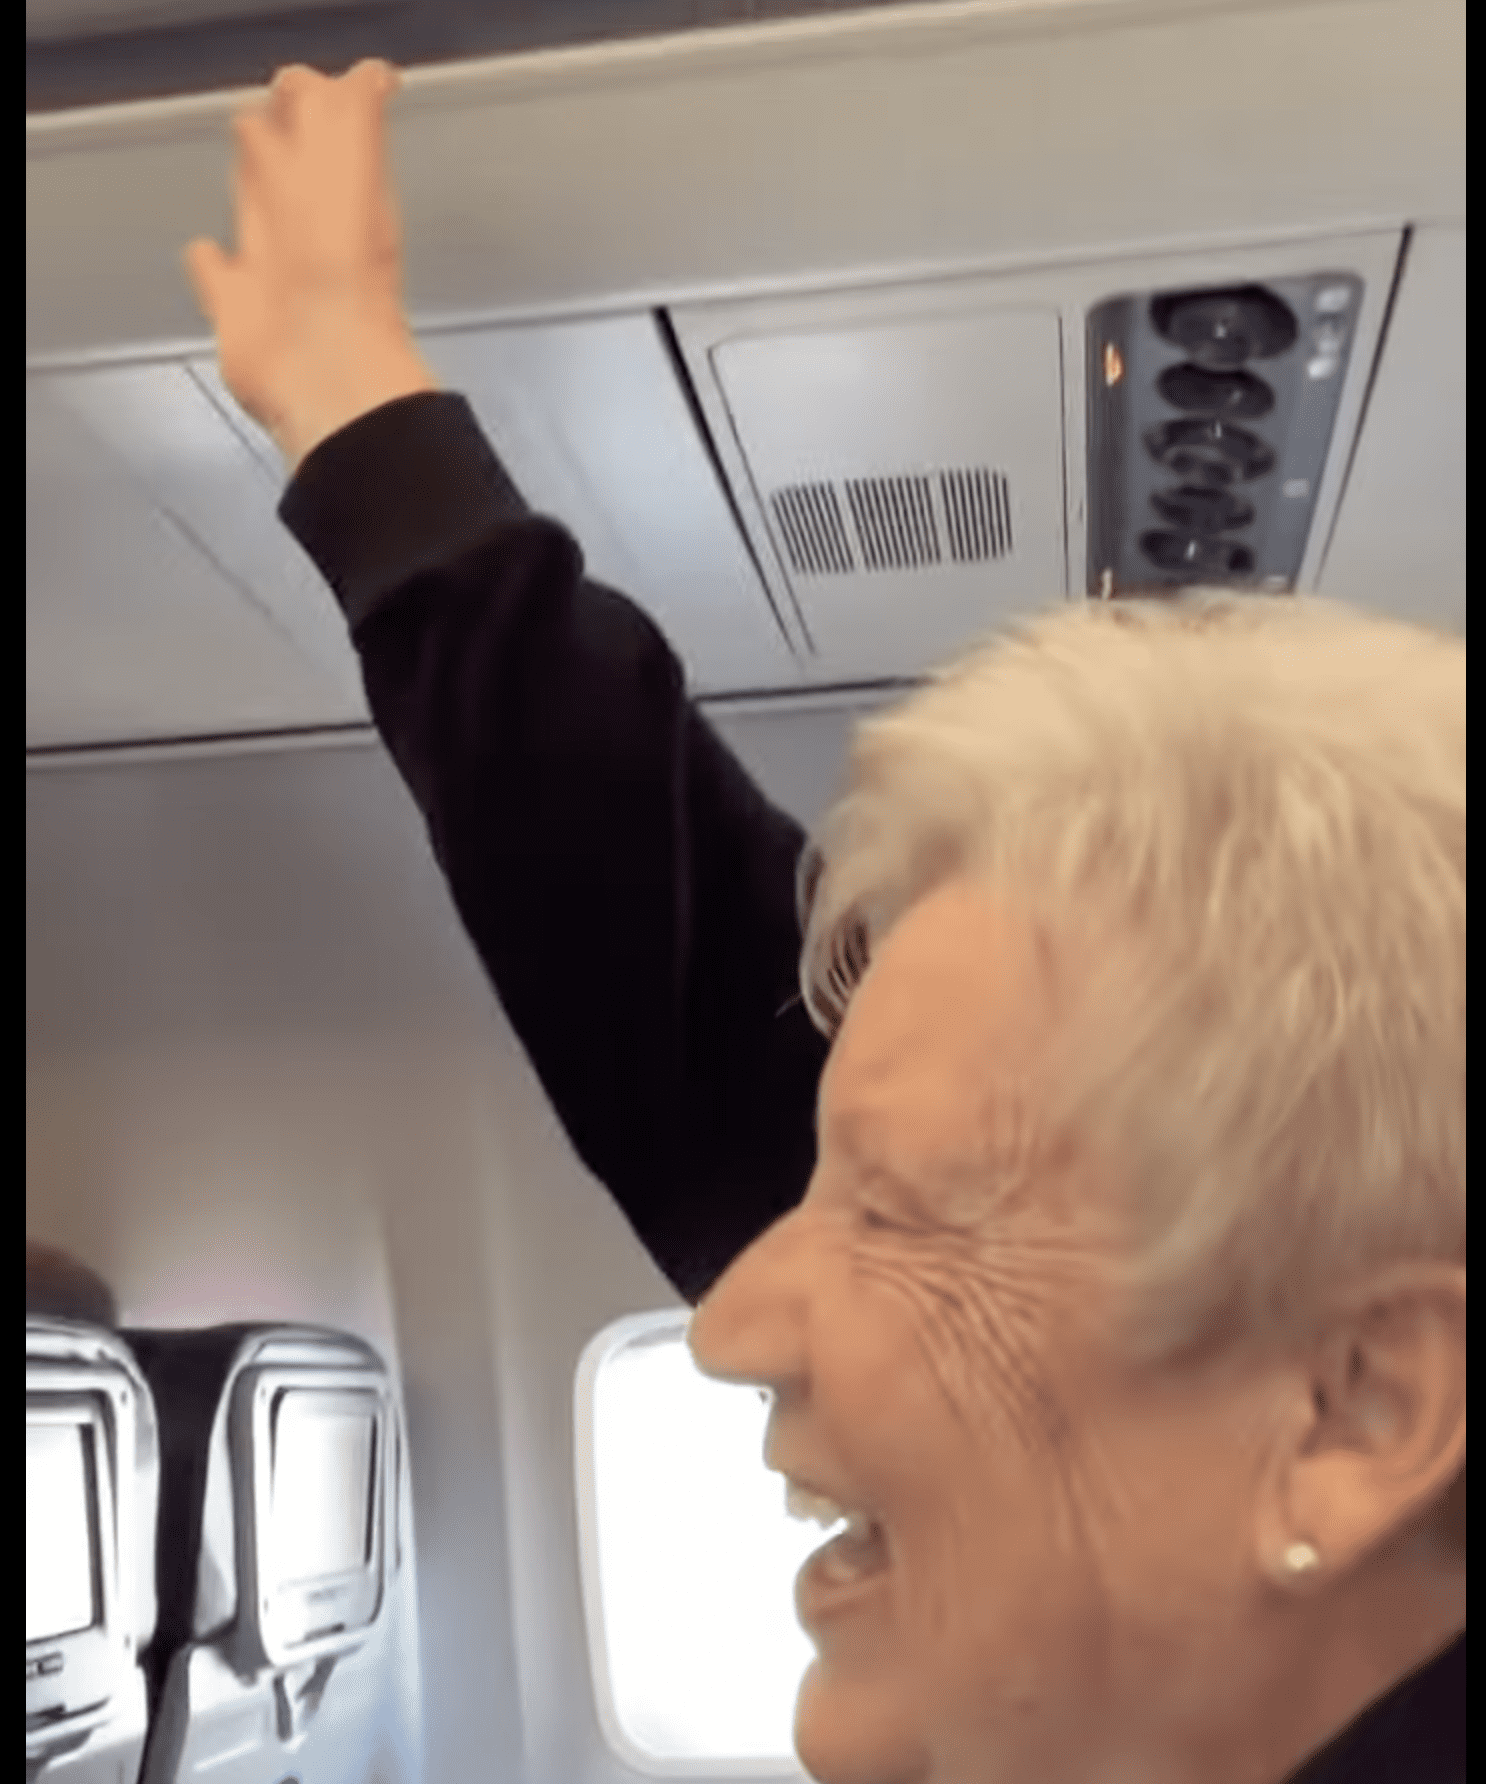 Michelle's mother raised her hand in response to the pilot's announcement. | Source: Youtube.com/Michelle A